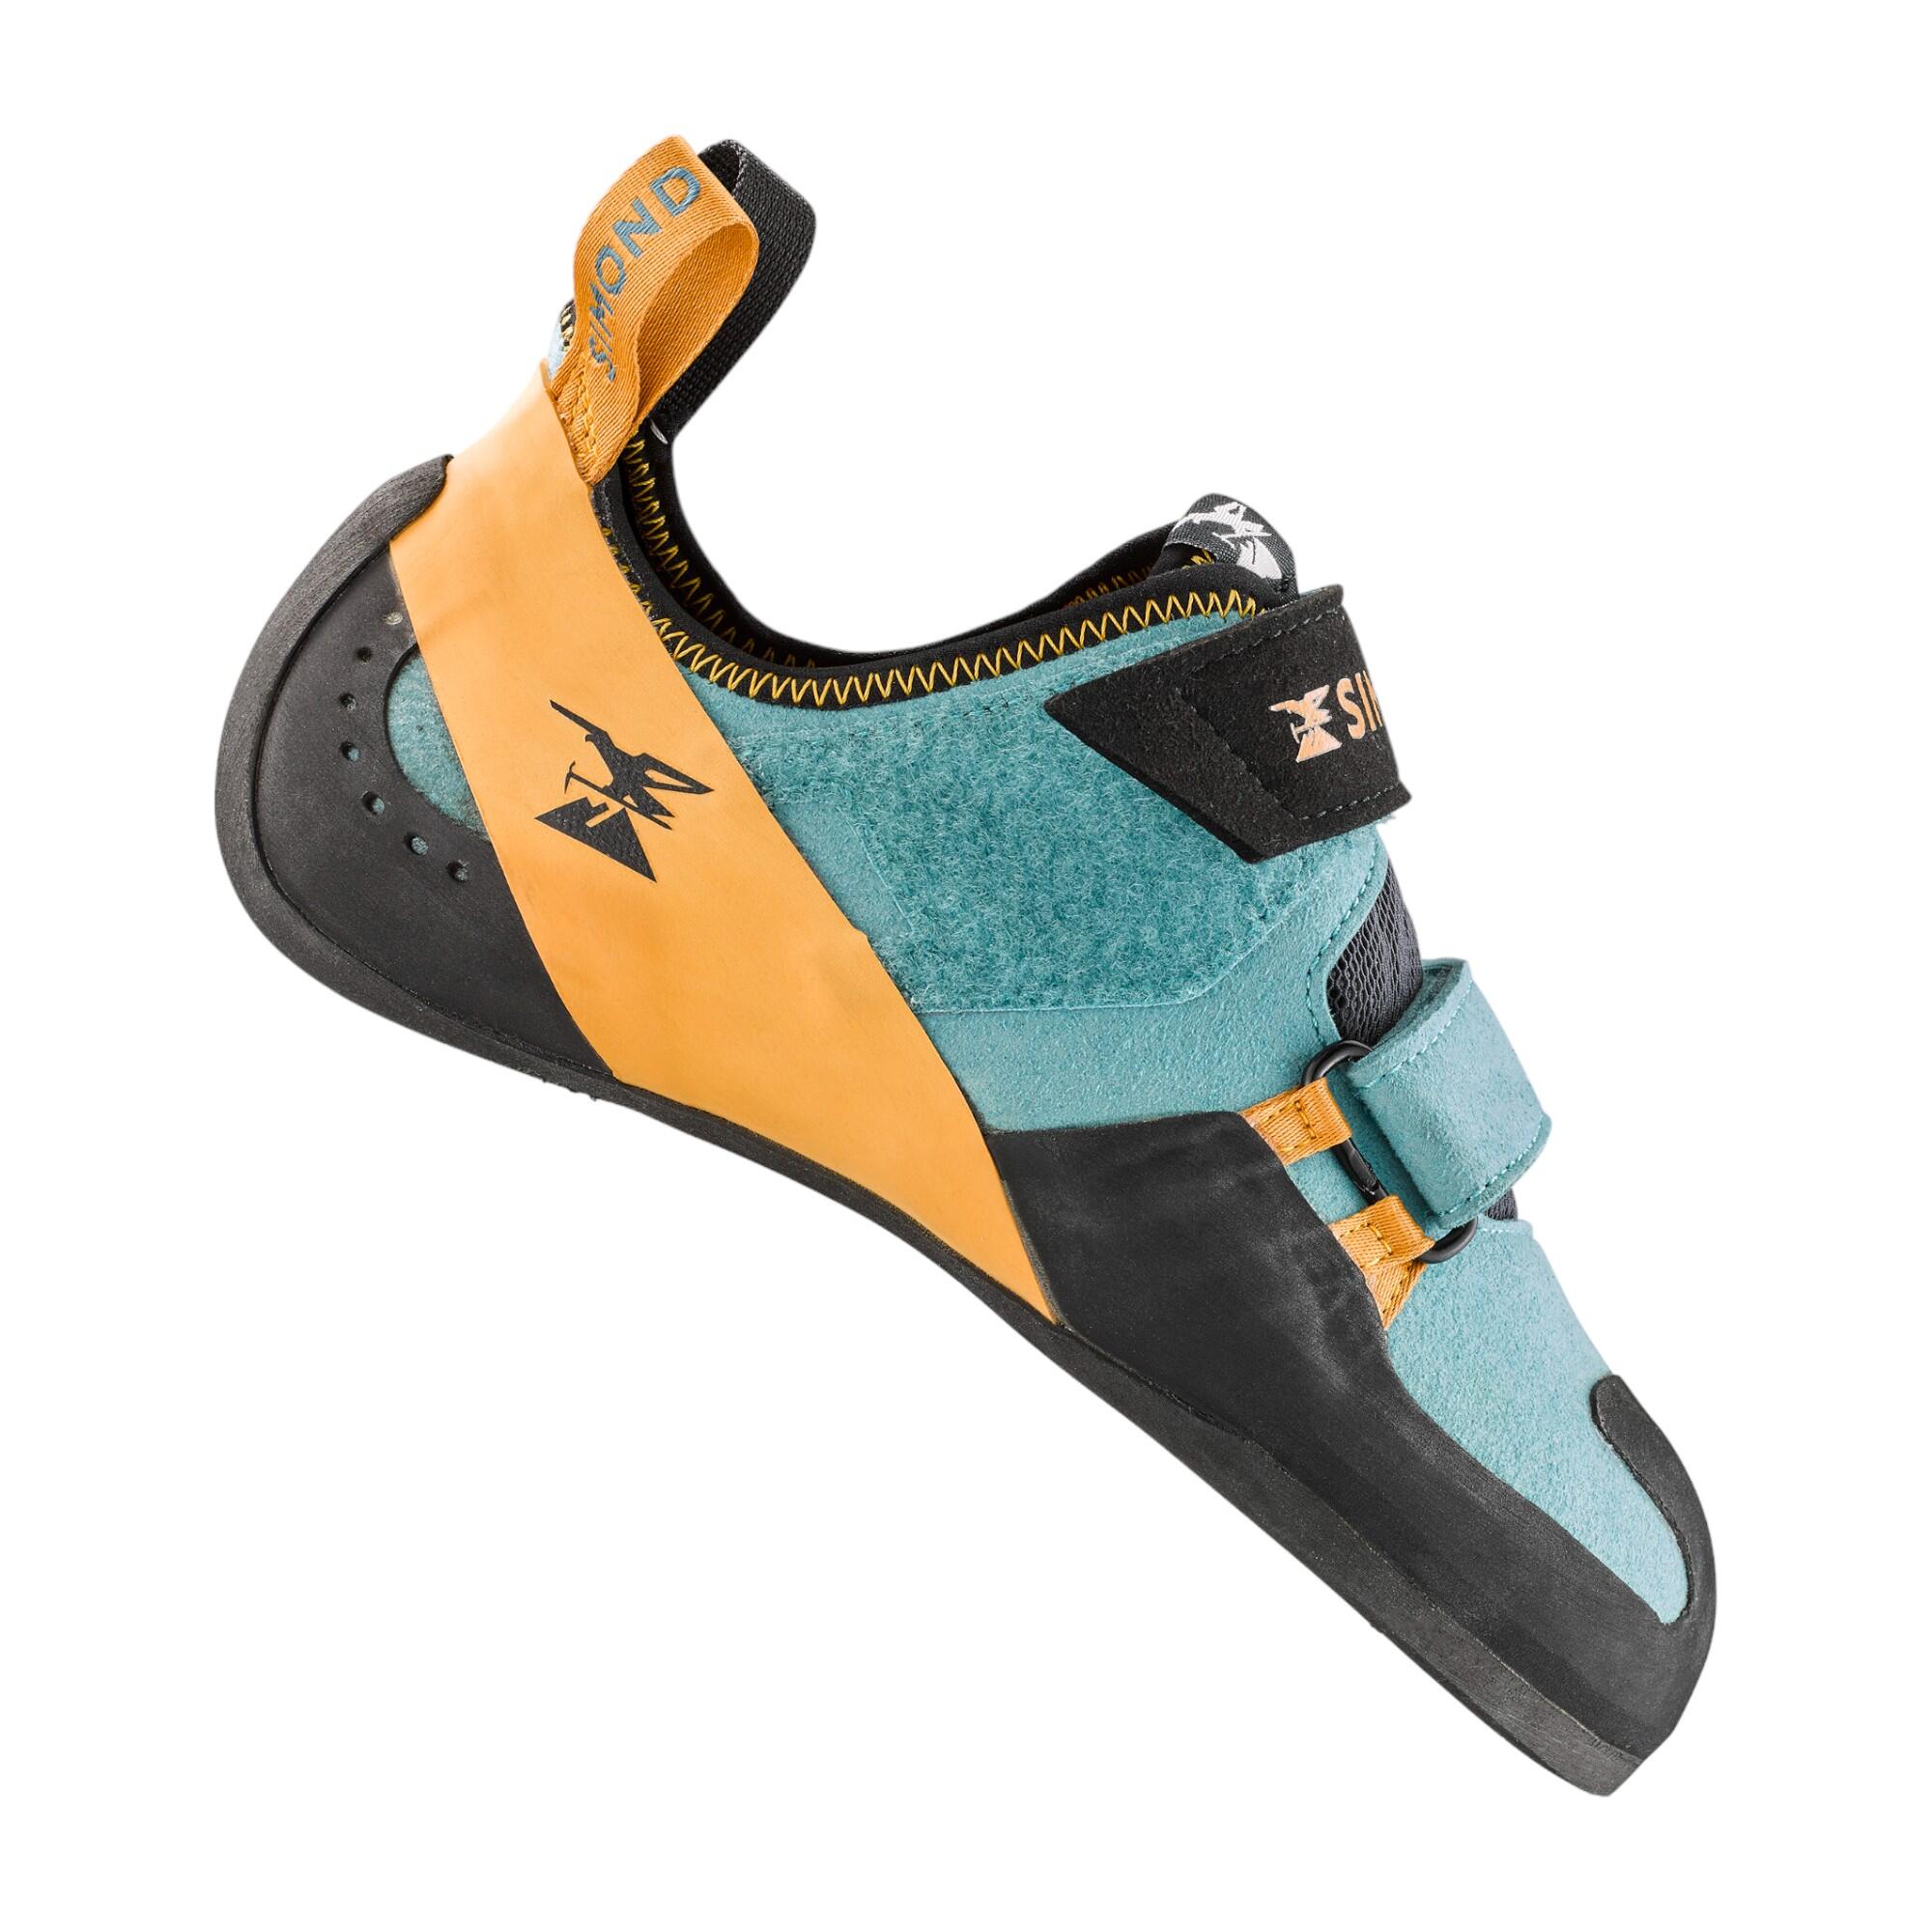 Climbing Shoes and Harnesses